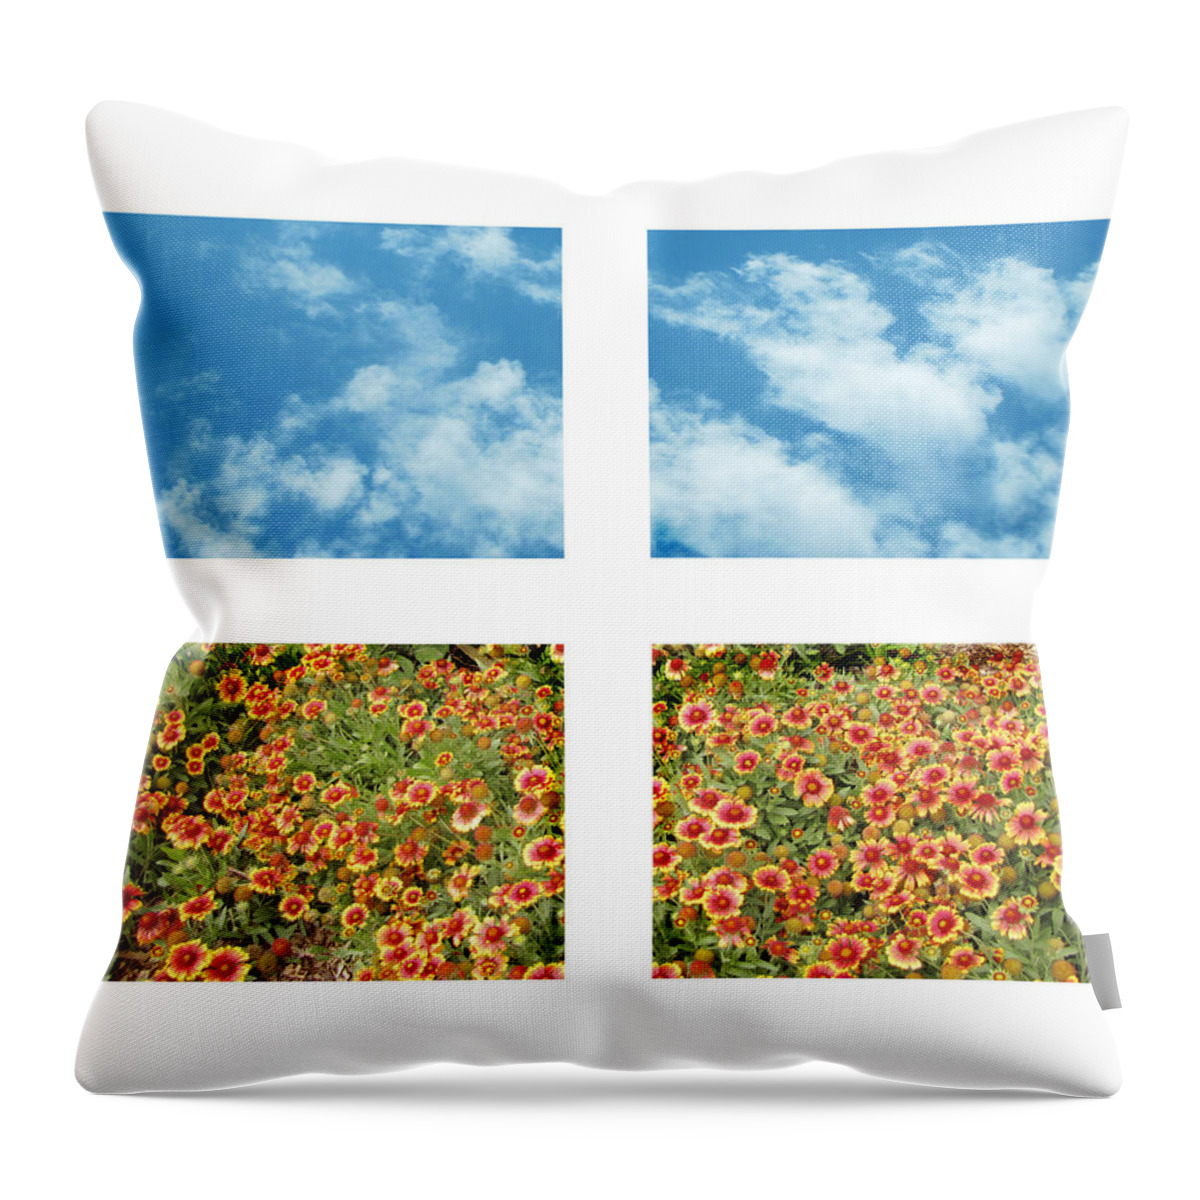 Flowers Throw Pillow featuring the photograph Flowers and Sky by Ann Powell